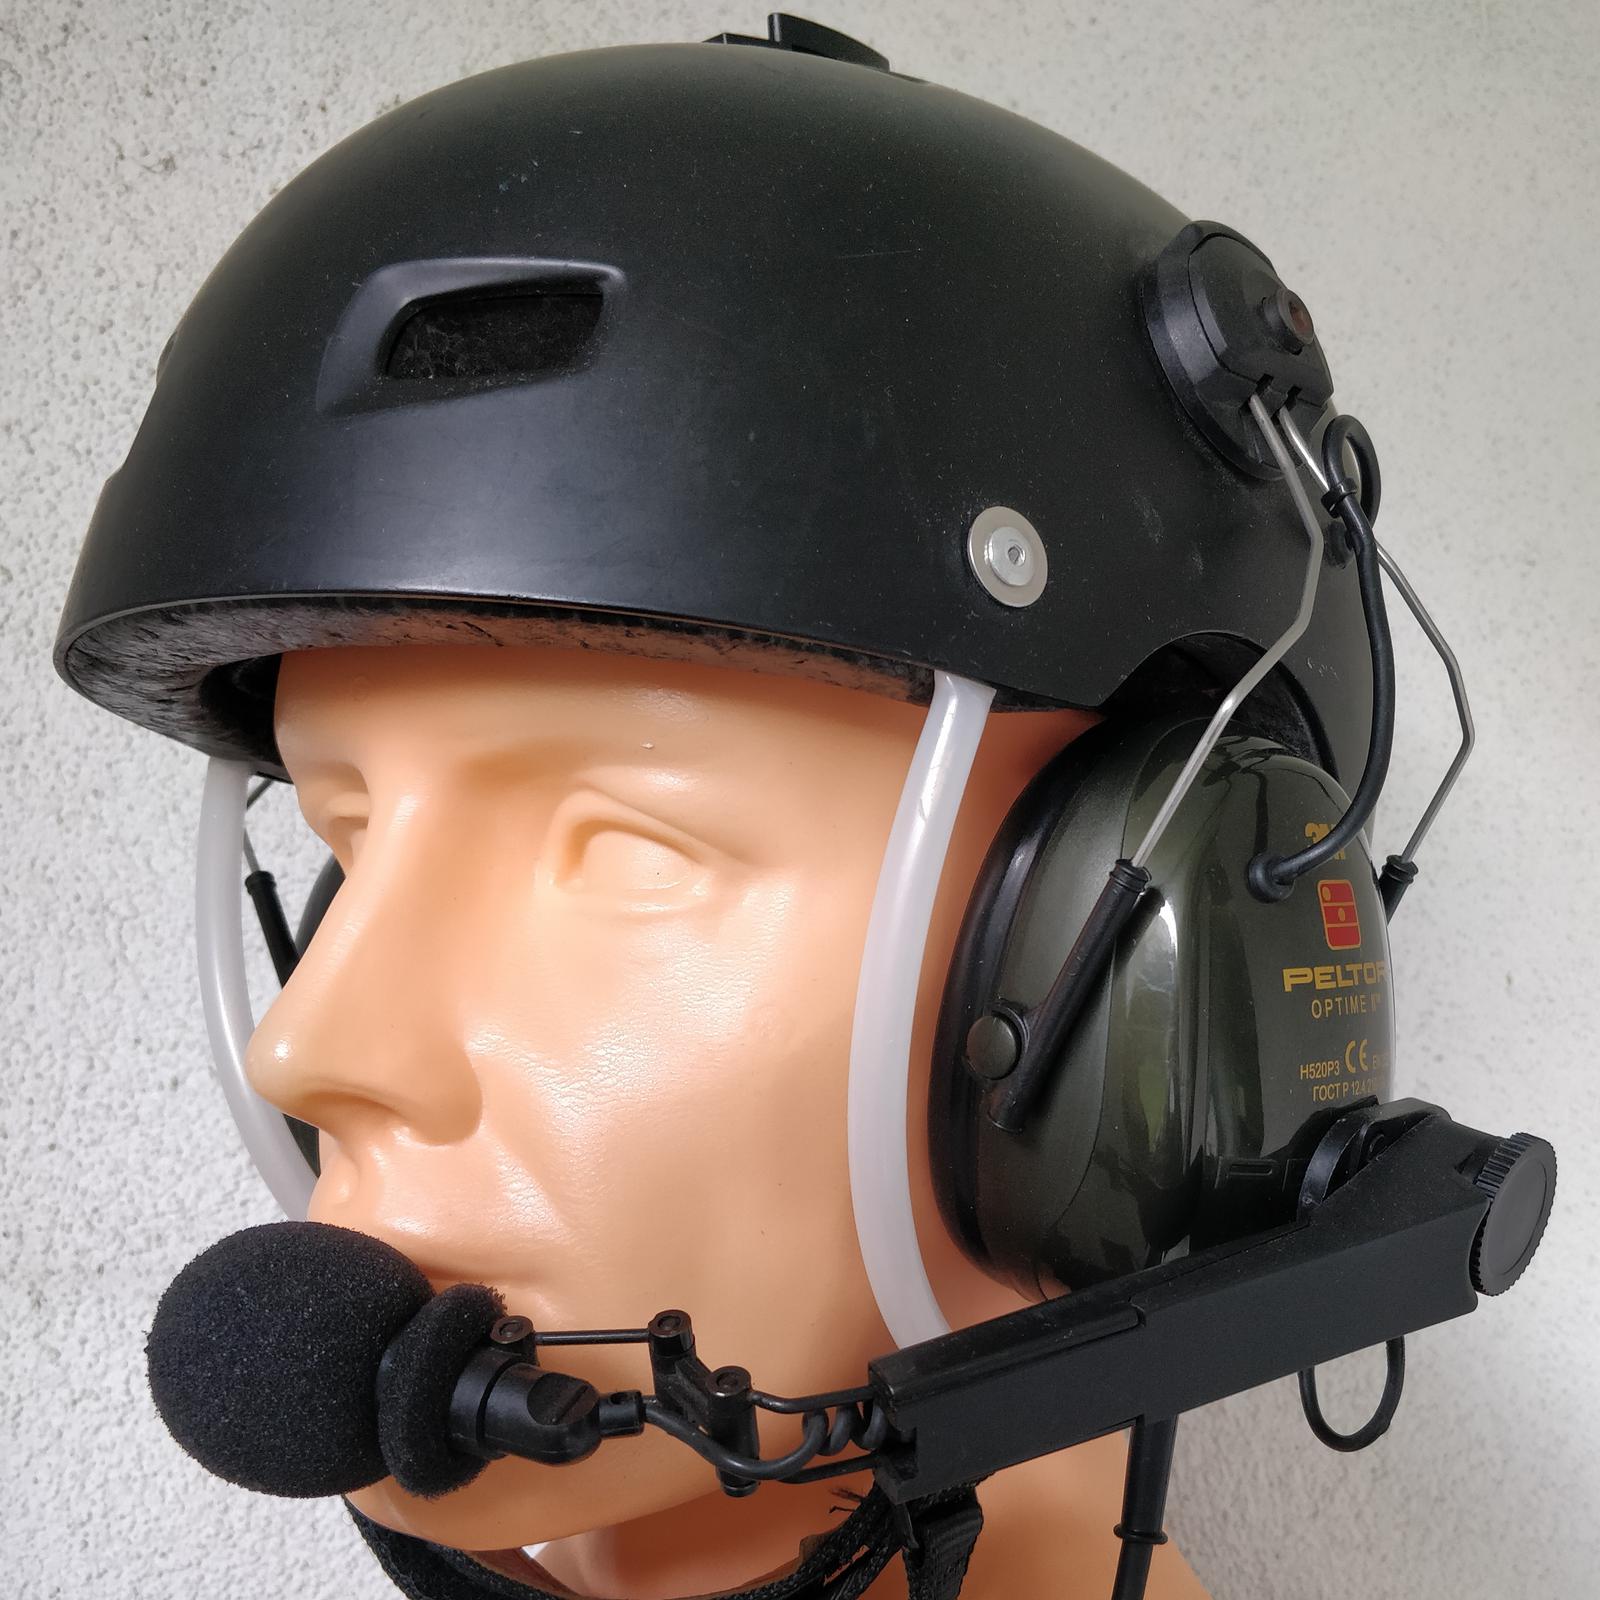 Top Pilot Headsets: Enhance Your Flying Experience with the Best!